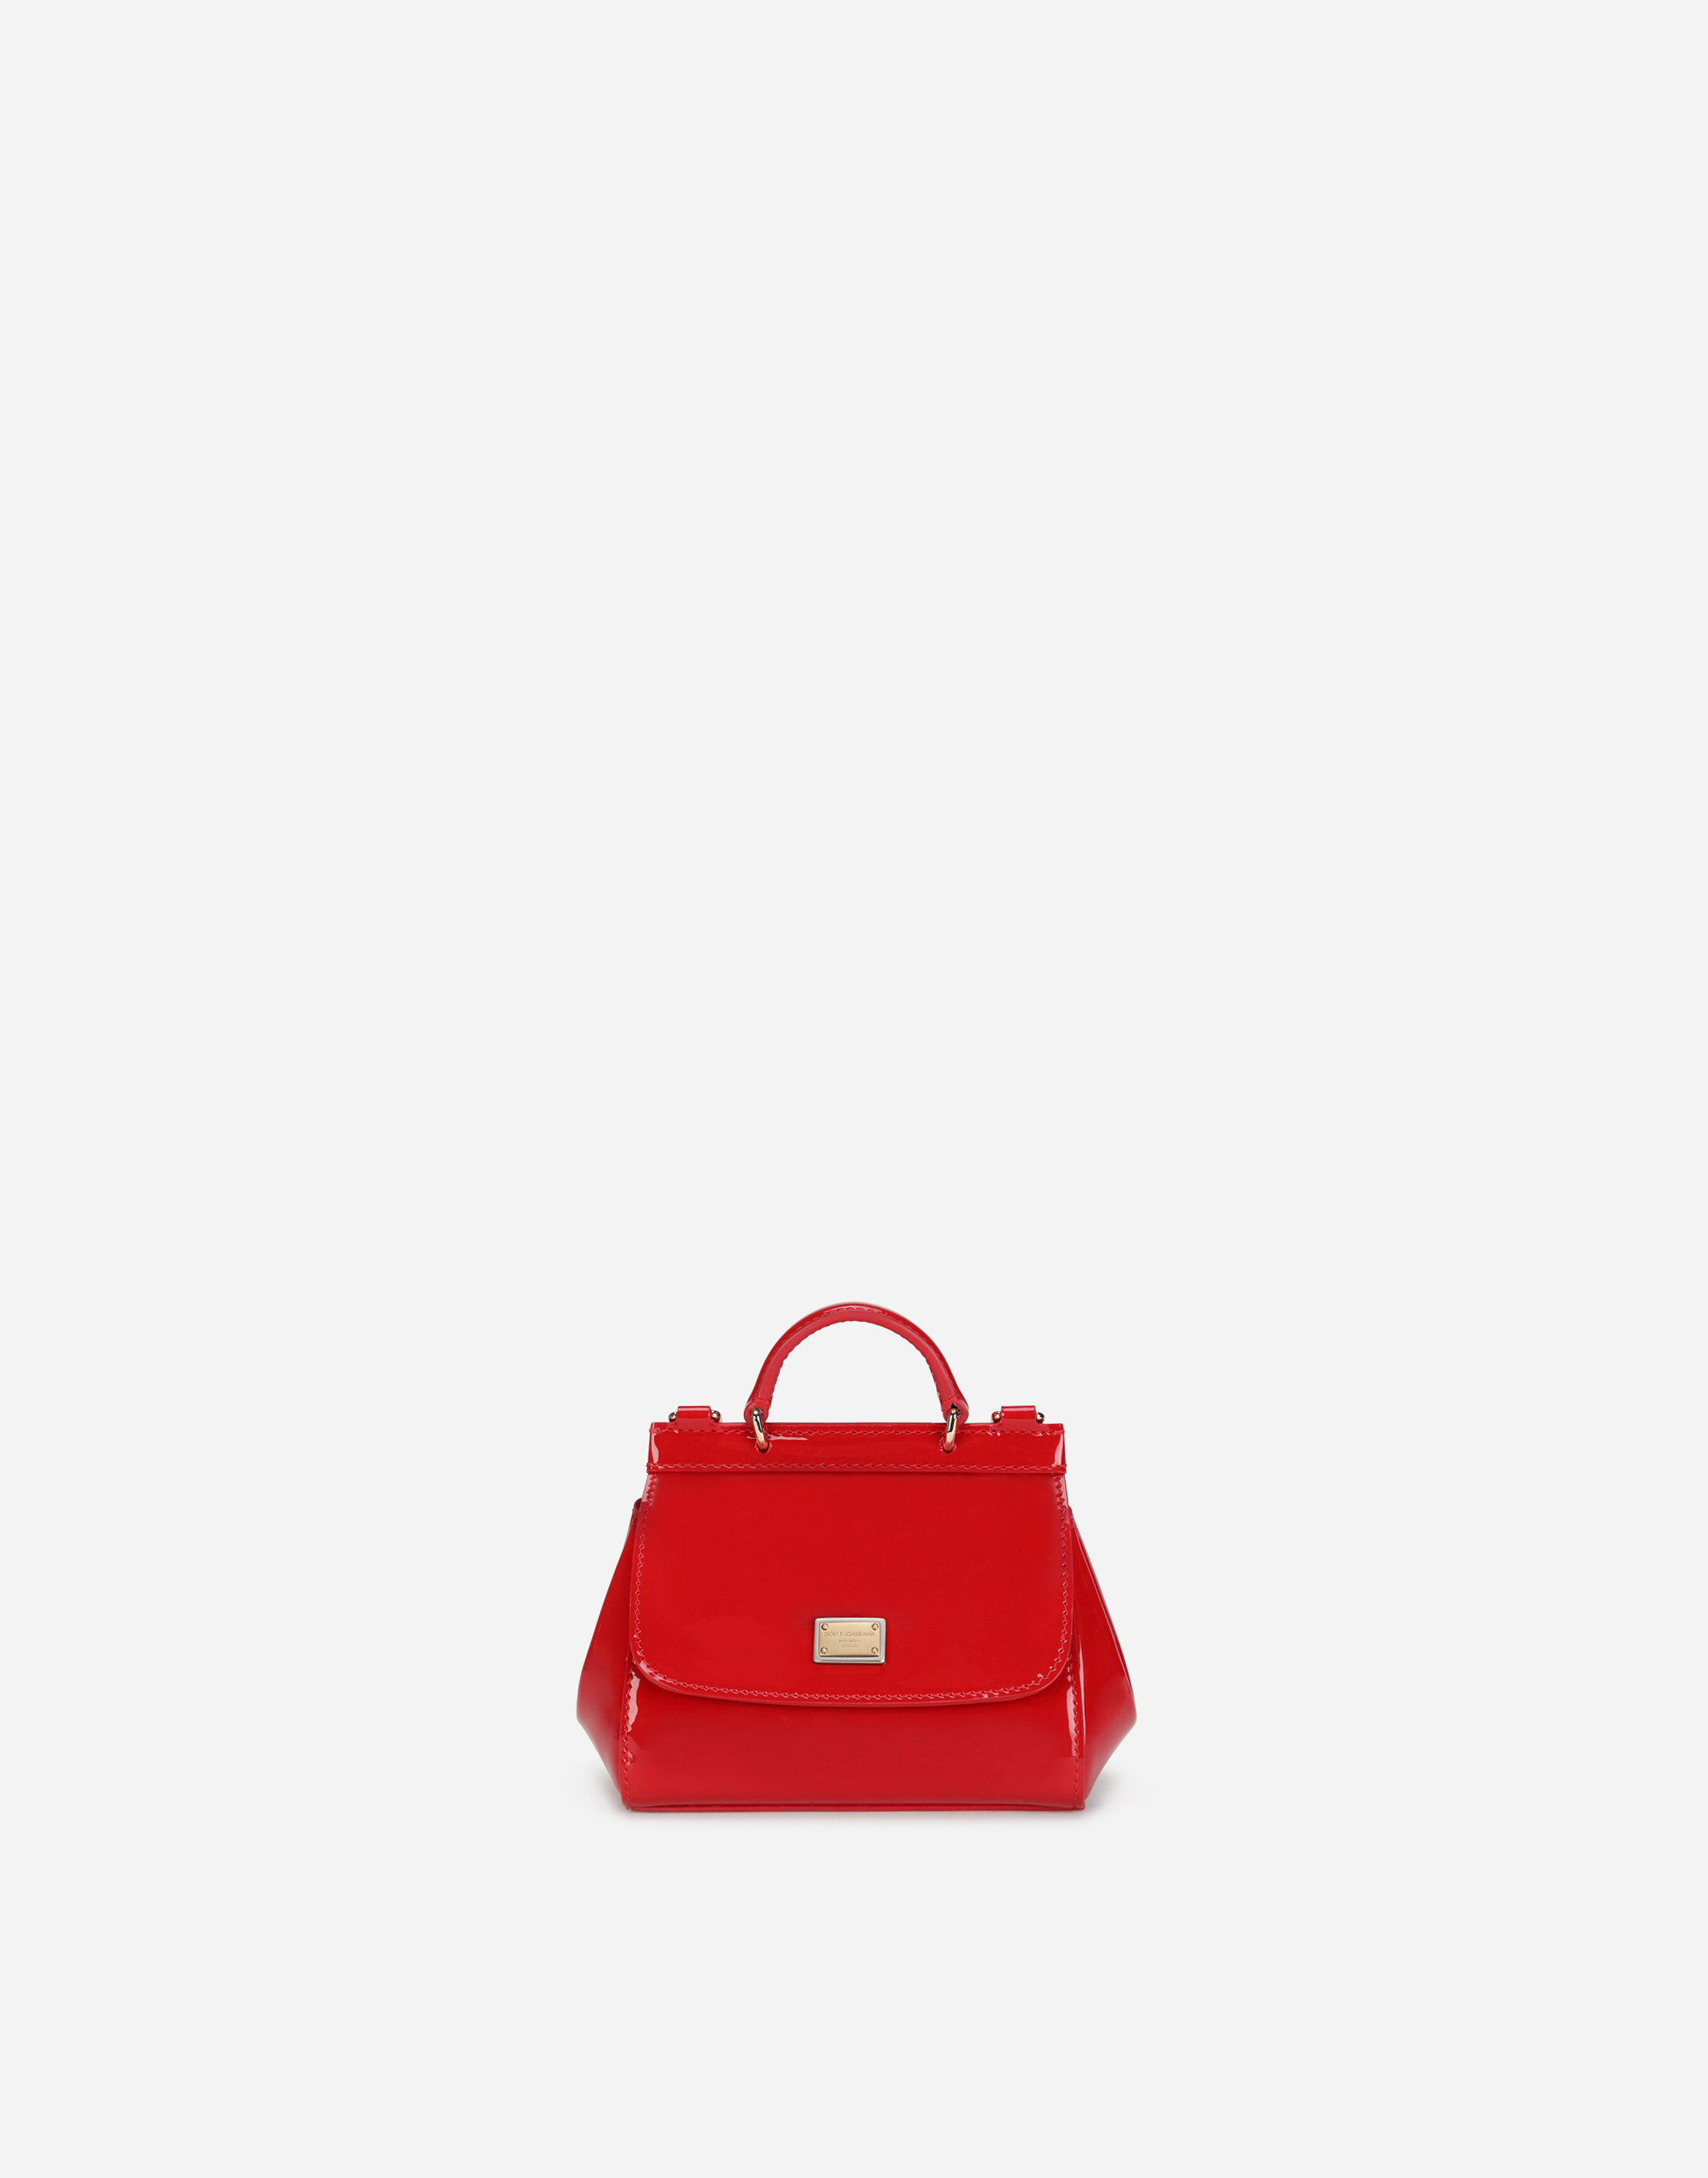 Patent leather mini Sicily bag in RED for Girls | Dolce&Gabbana®